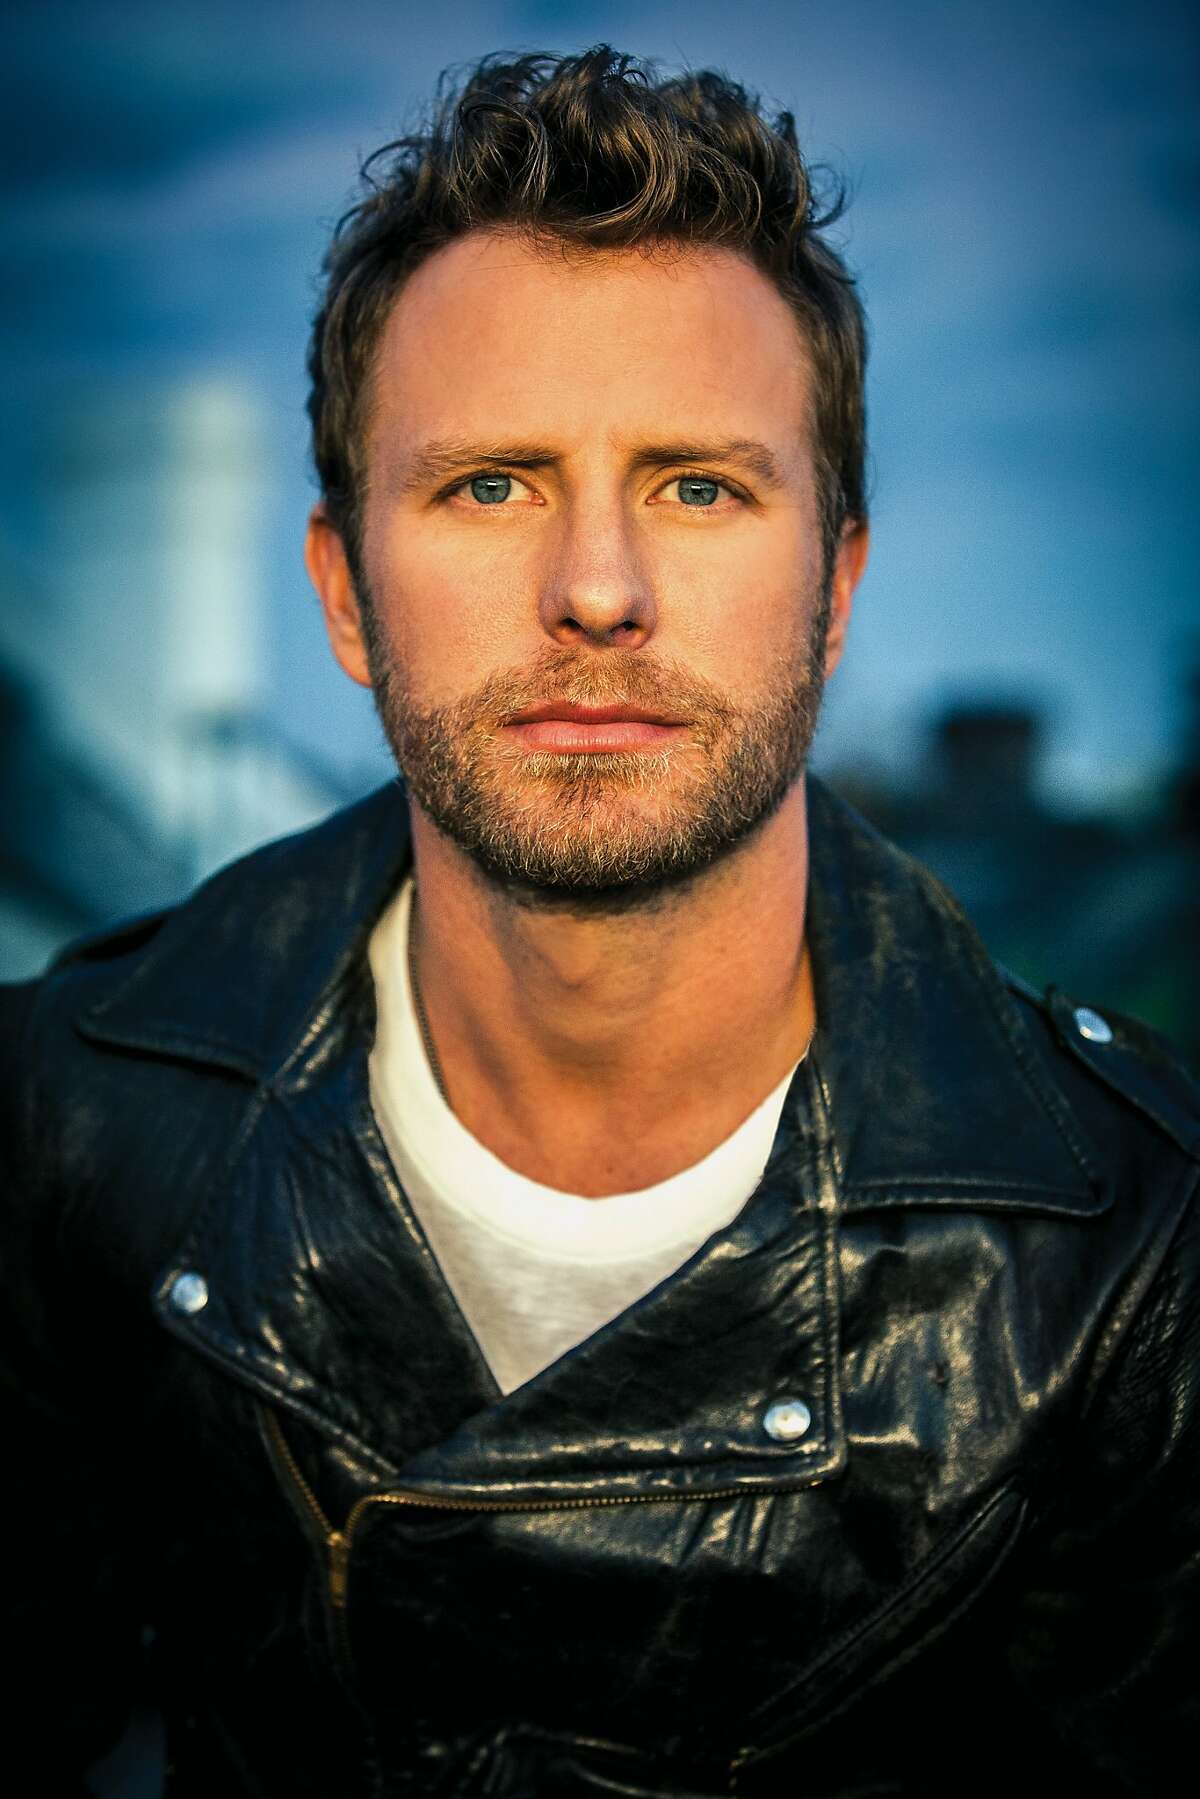 Dierks Bentley performs March 24 at RodeoHouston.